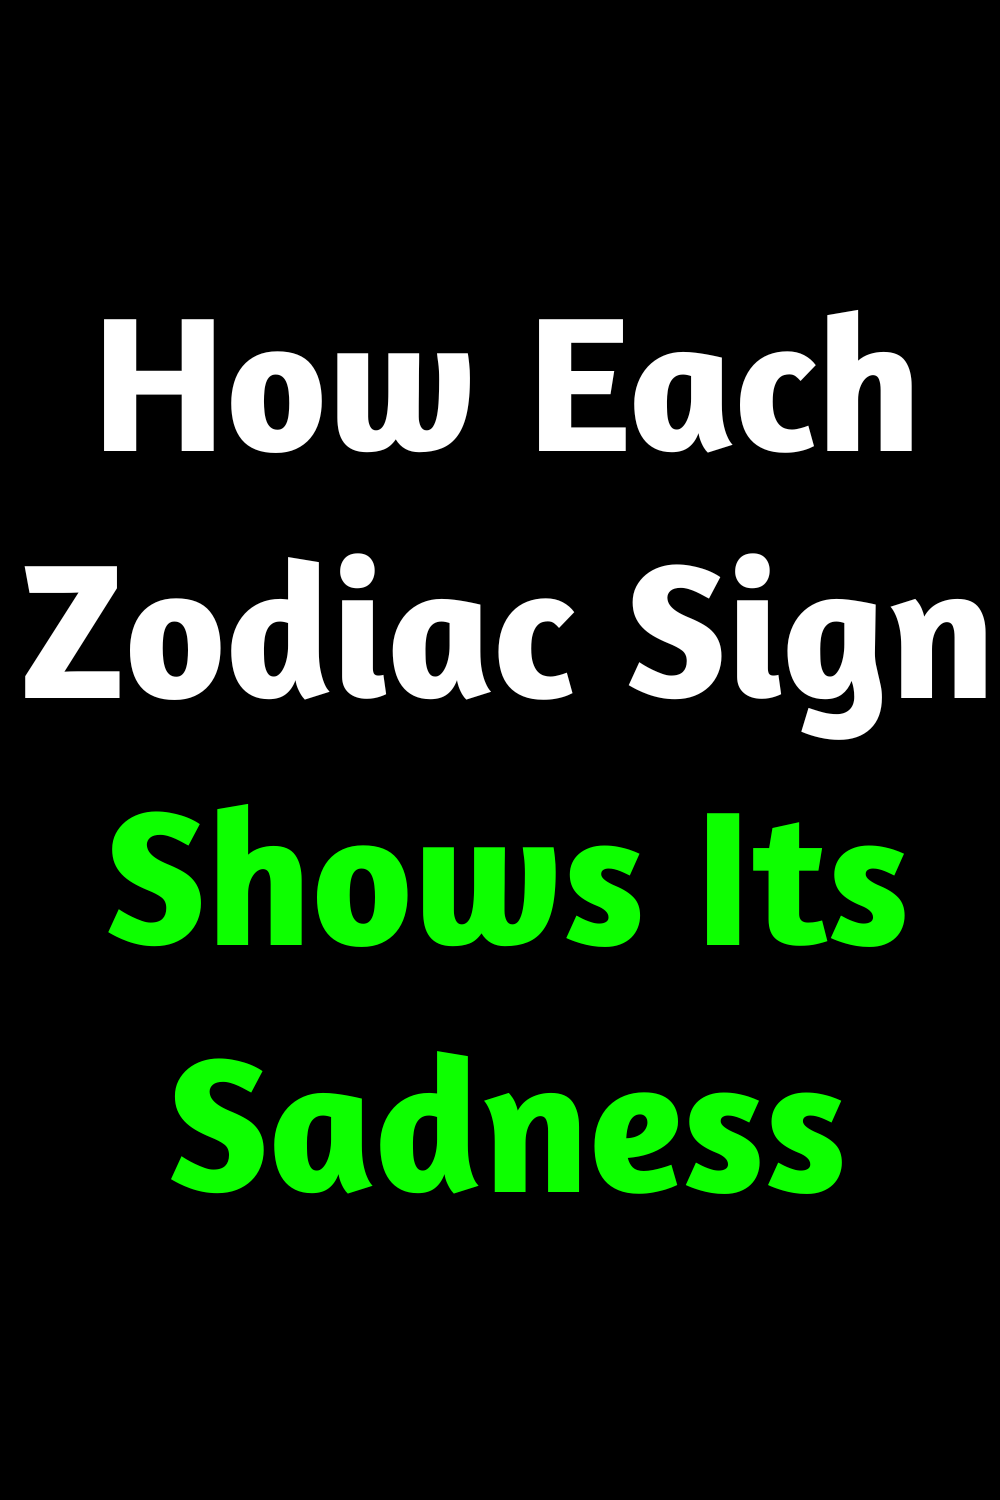 How Each Zodiac Sign Shows Its Sadness